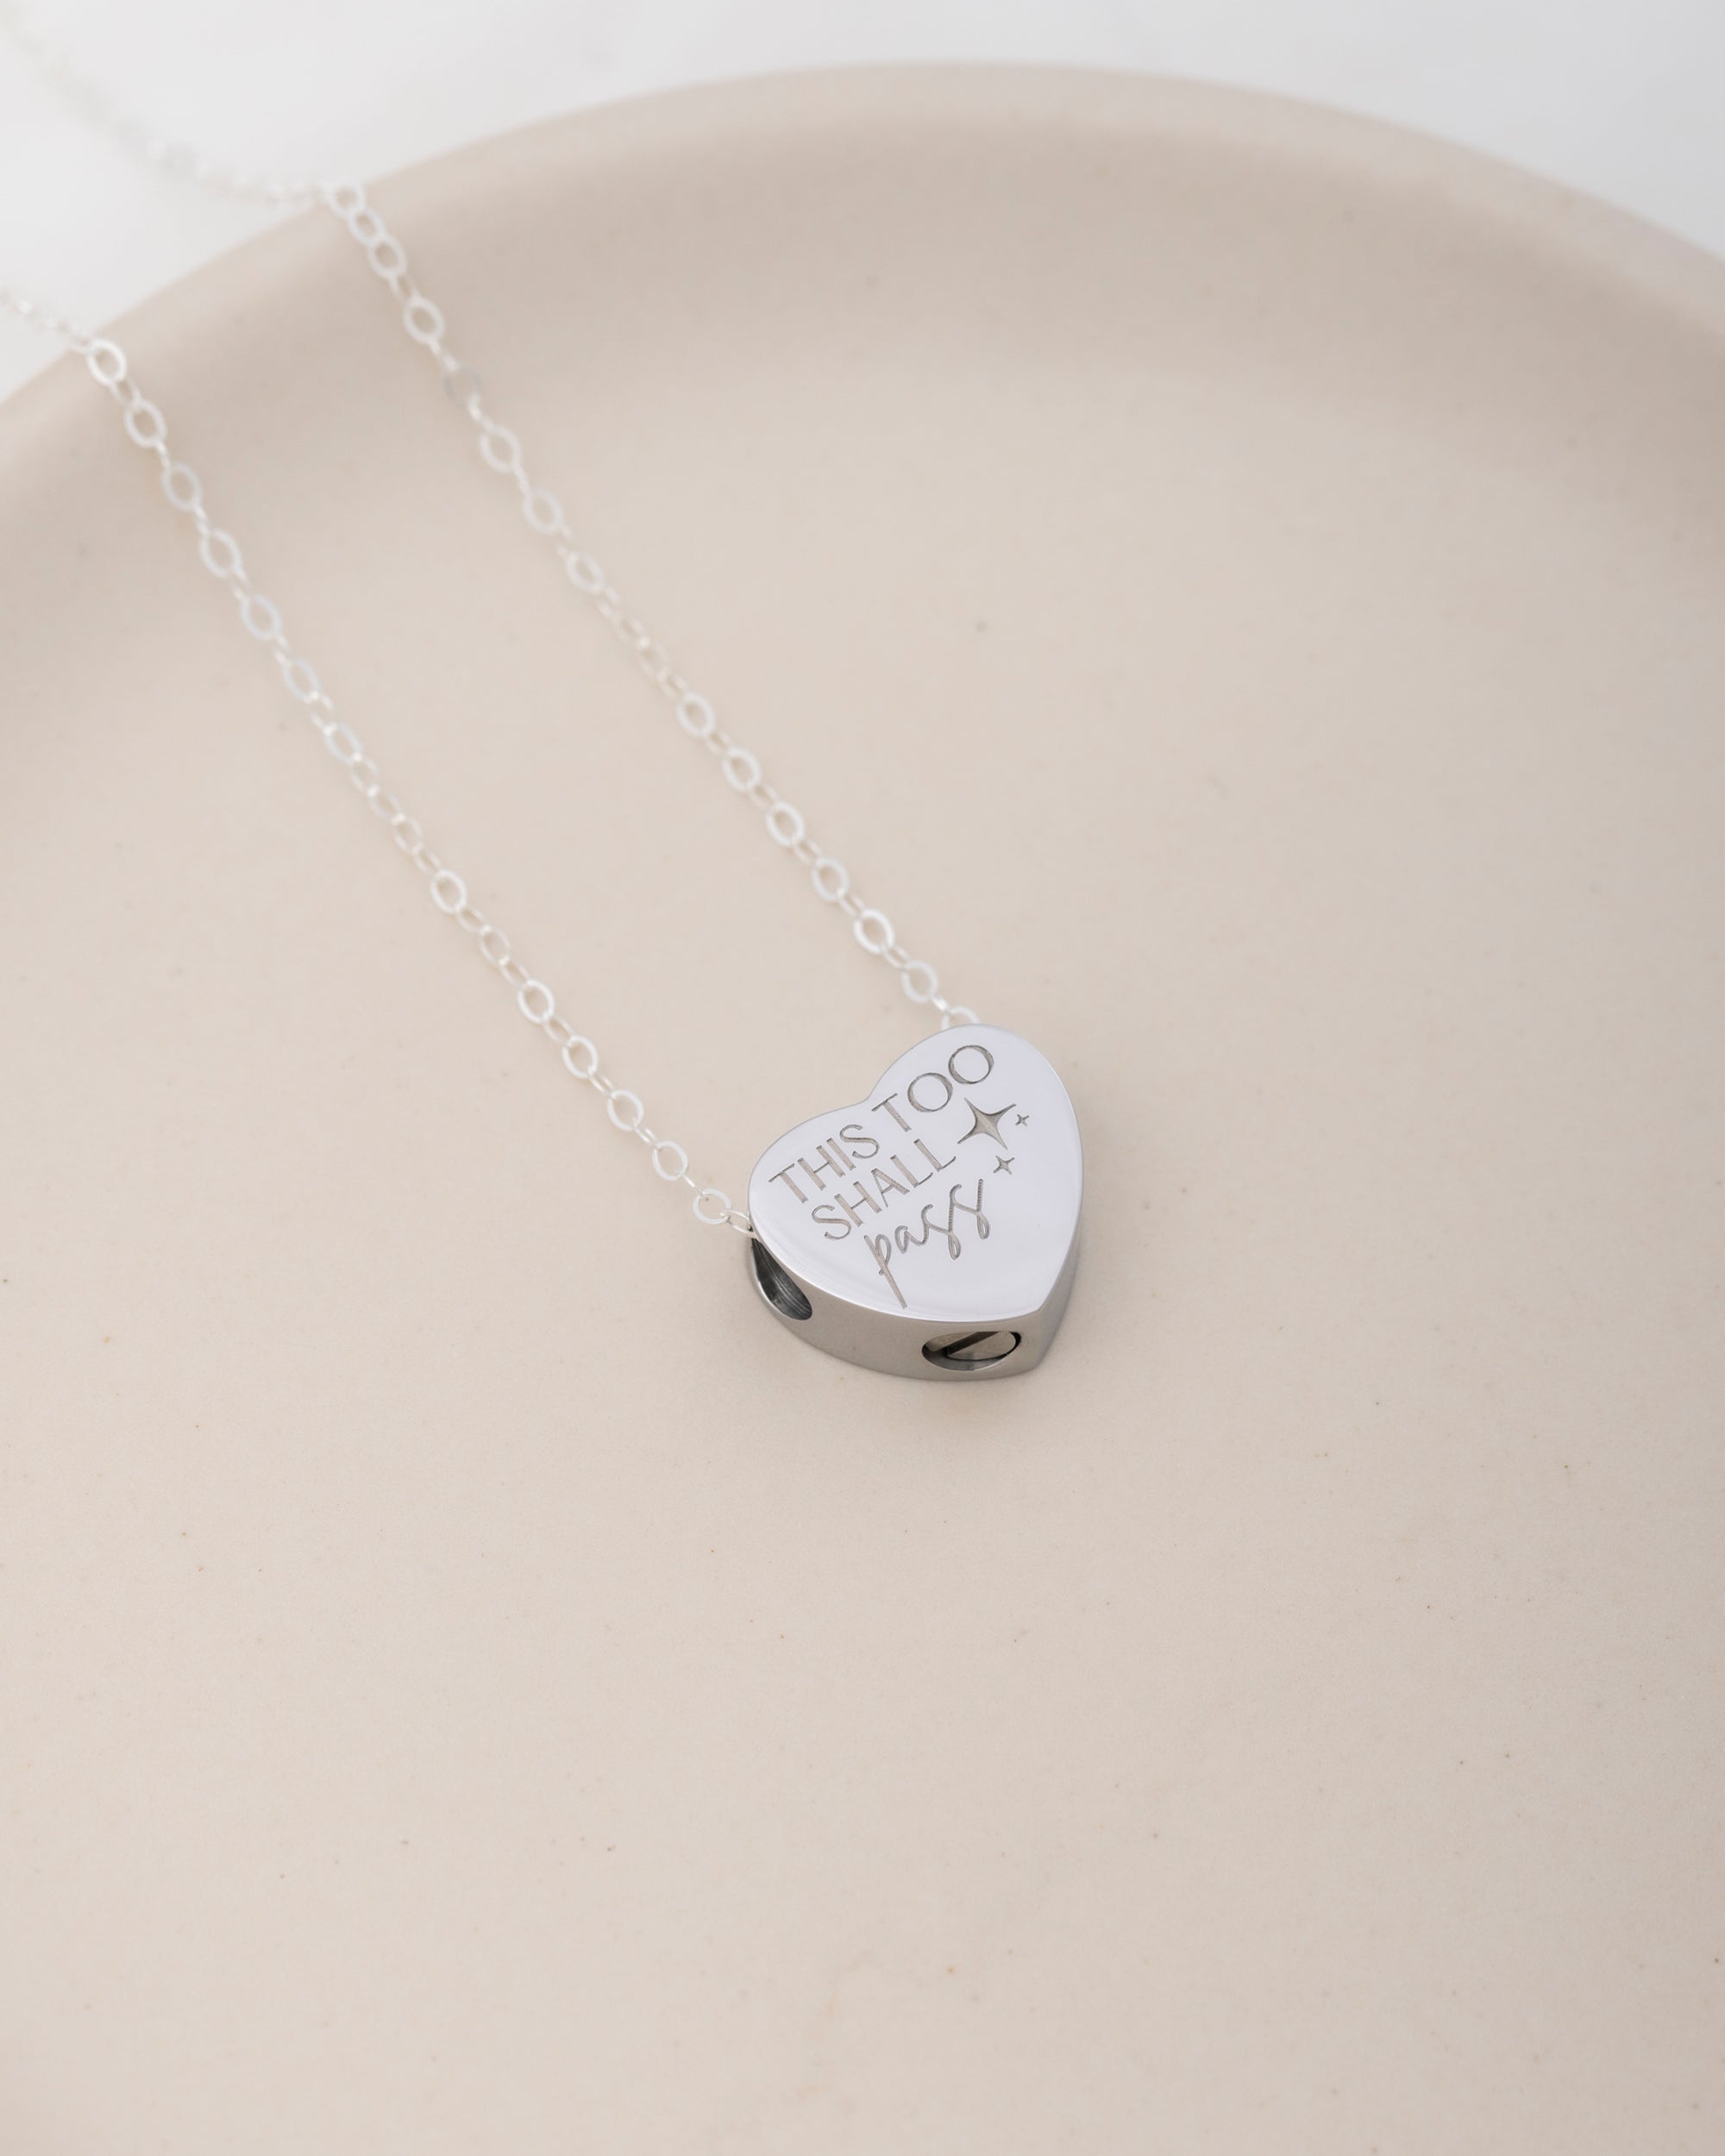 "This Too Shall Pass" Necklace